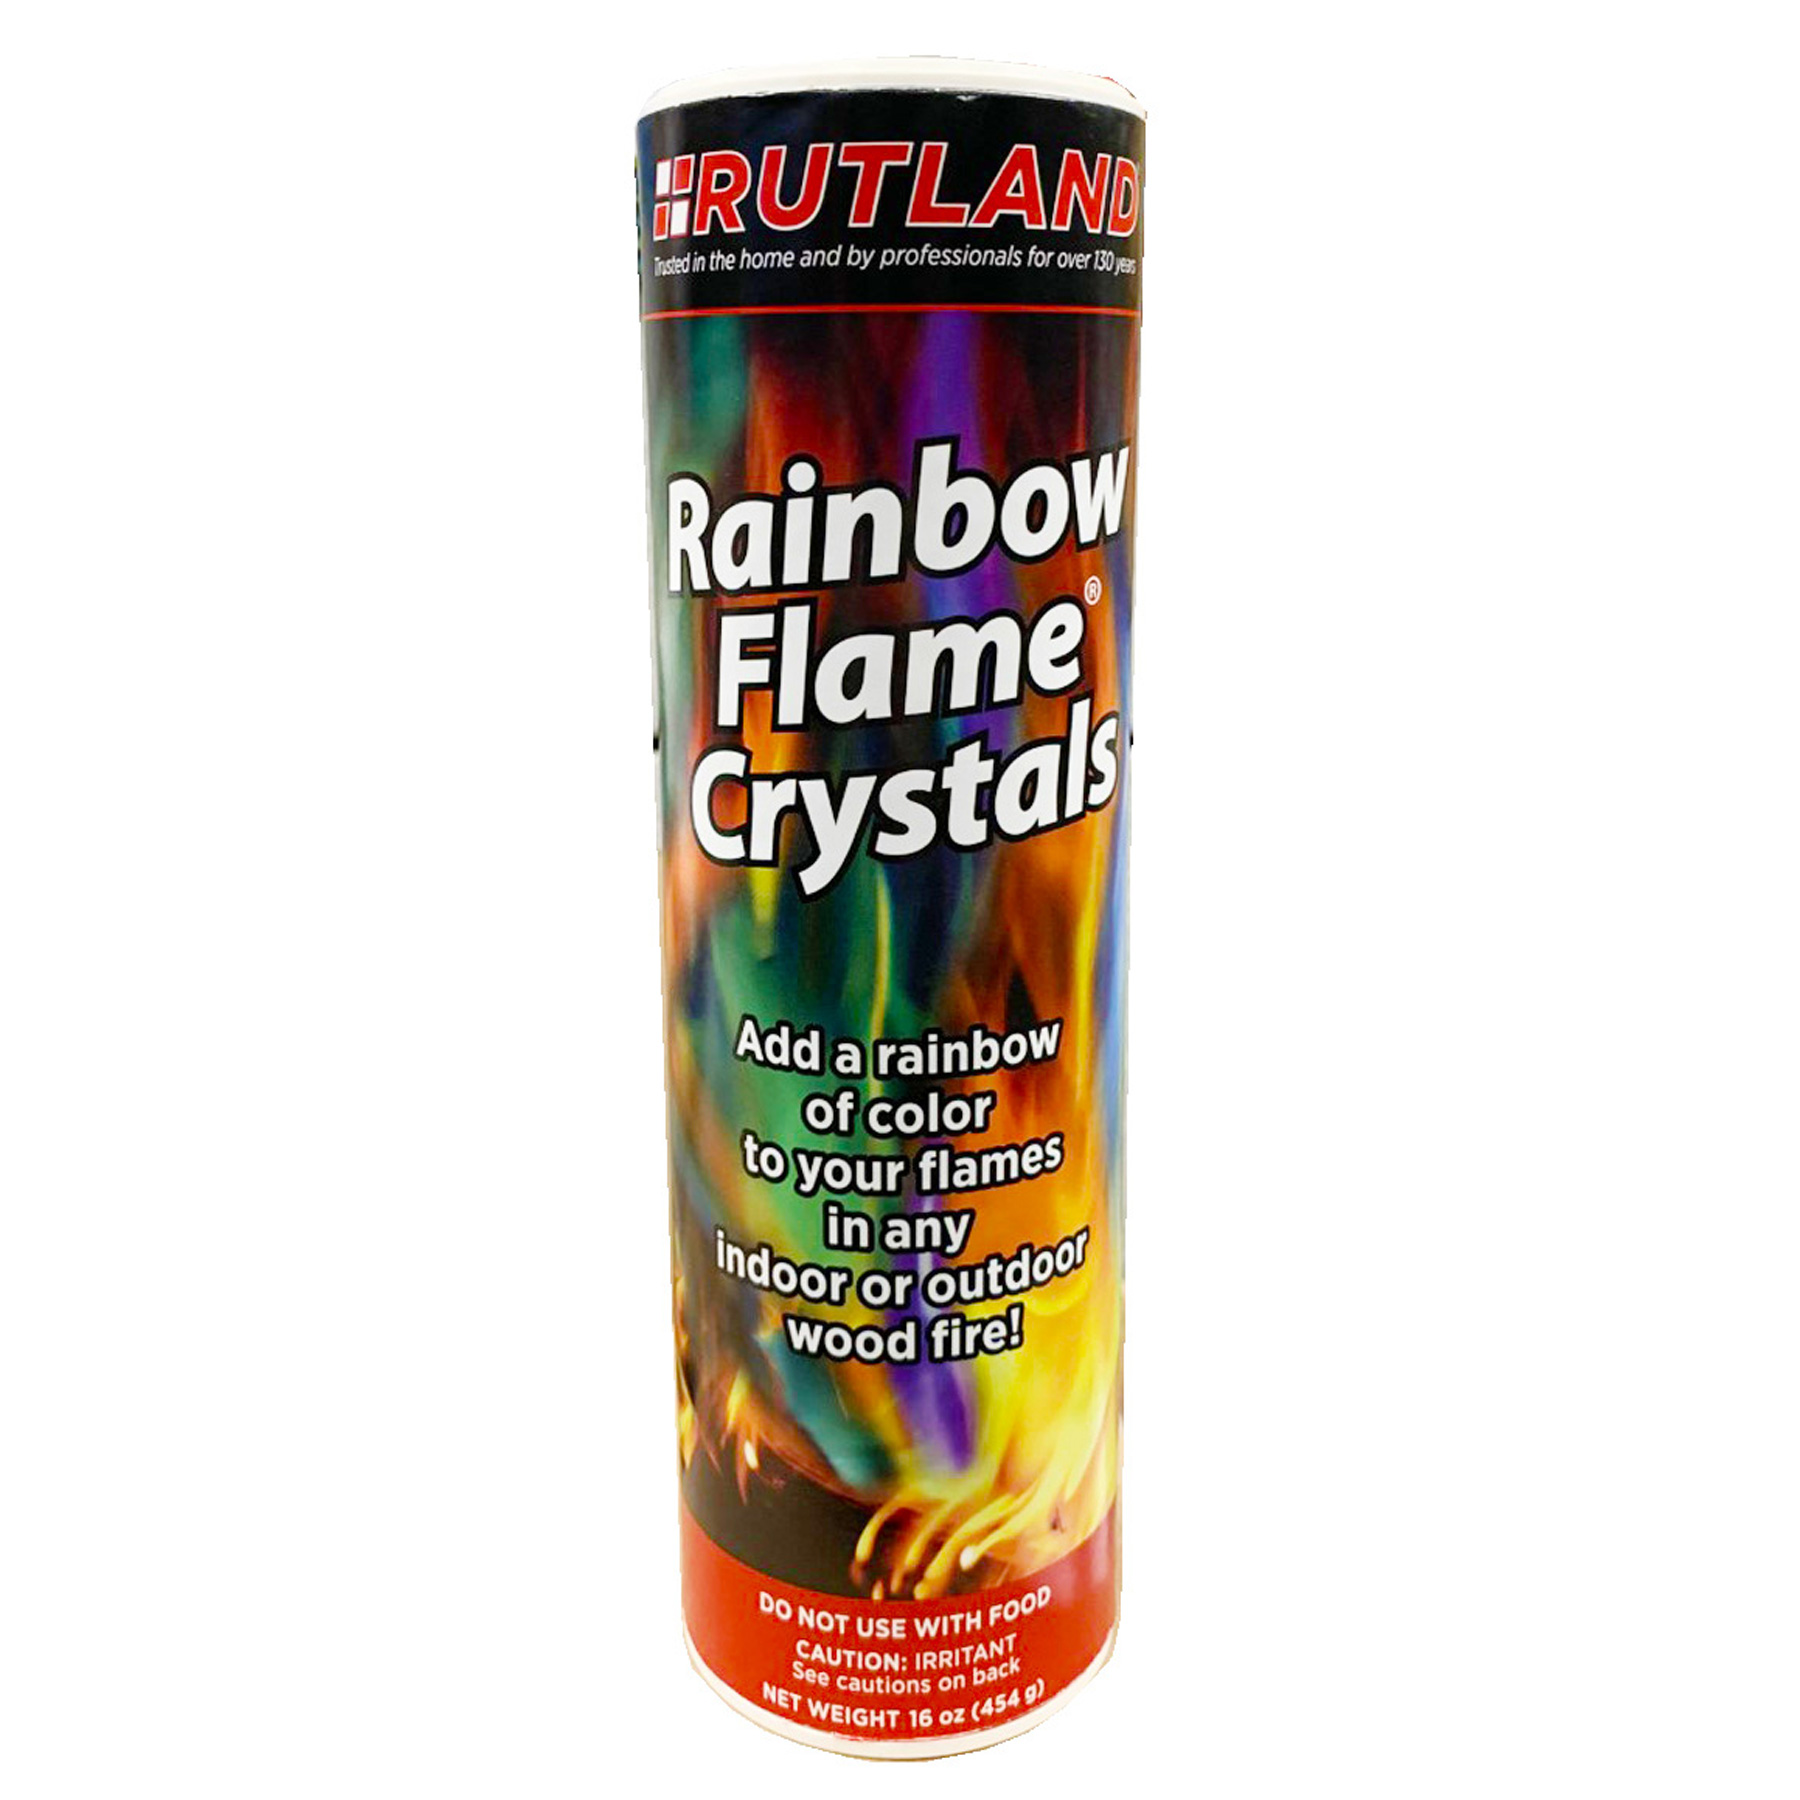 COLOR FLAME CRYSTAL 1 LB.